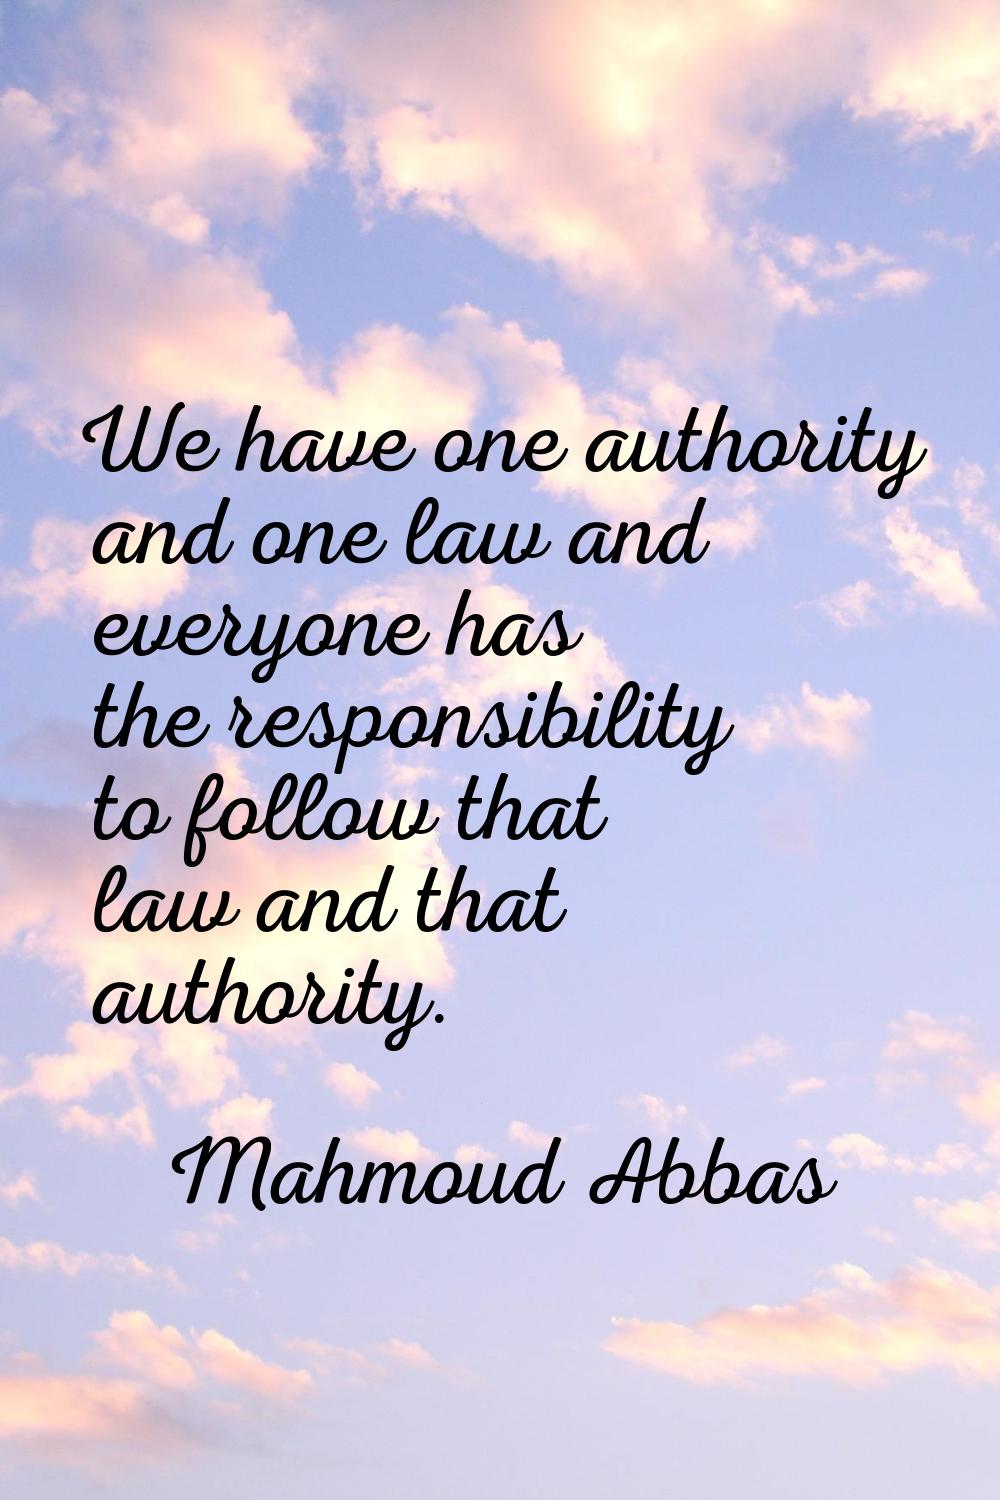 We have one authority and one law and everyone has the responsibility to follow that law and that a